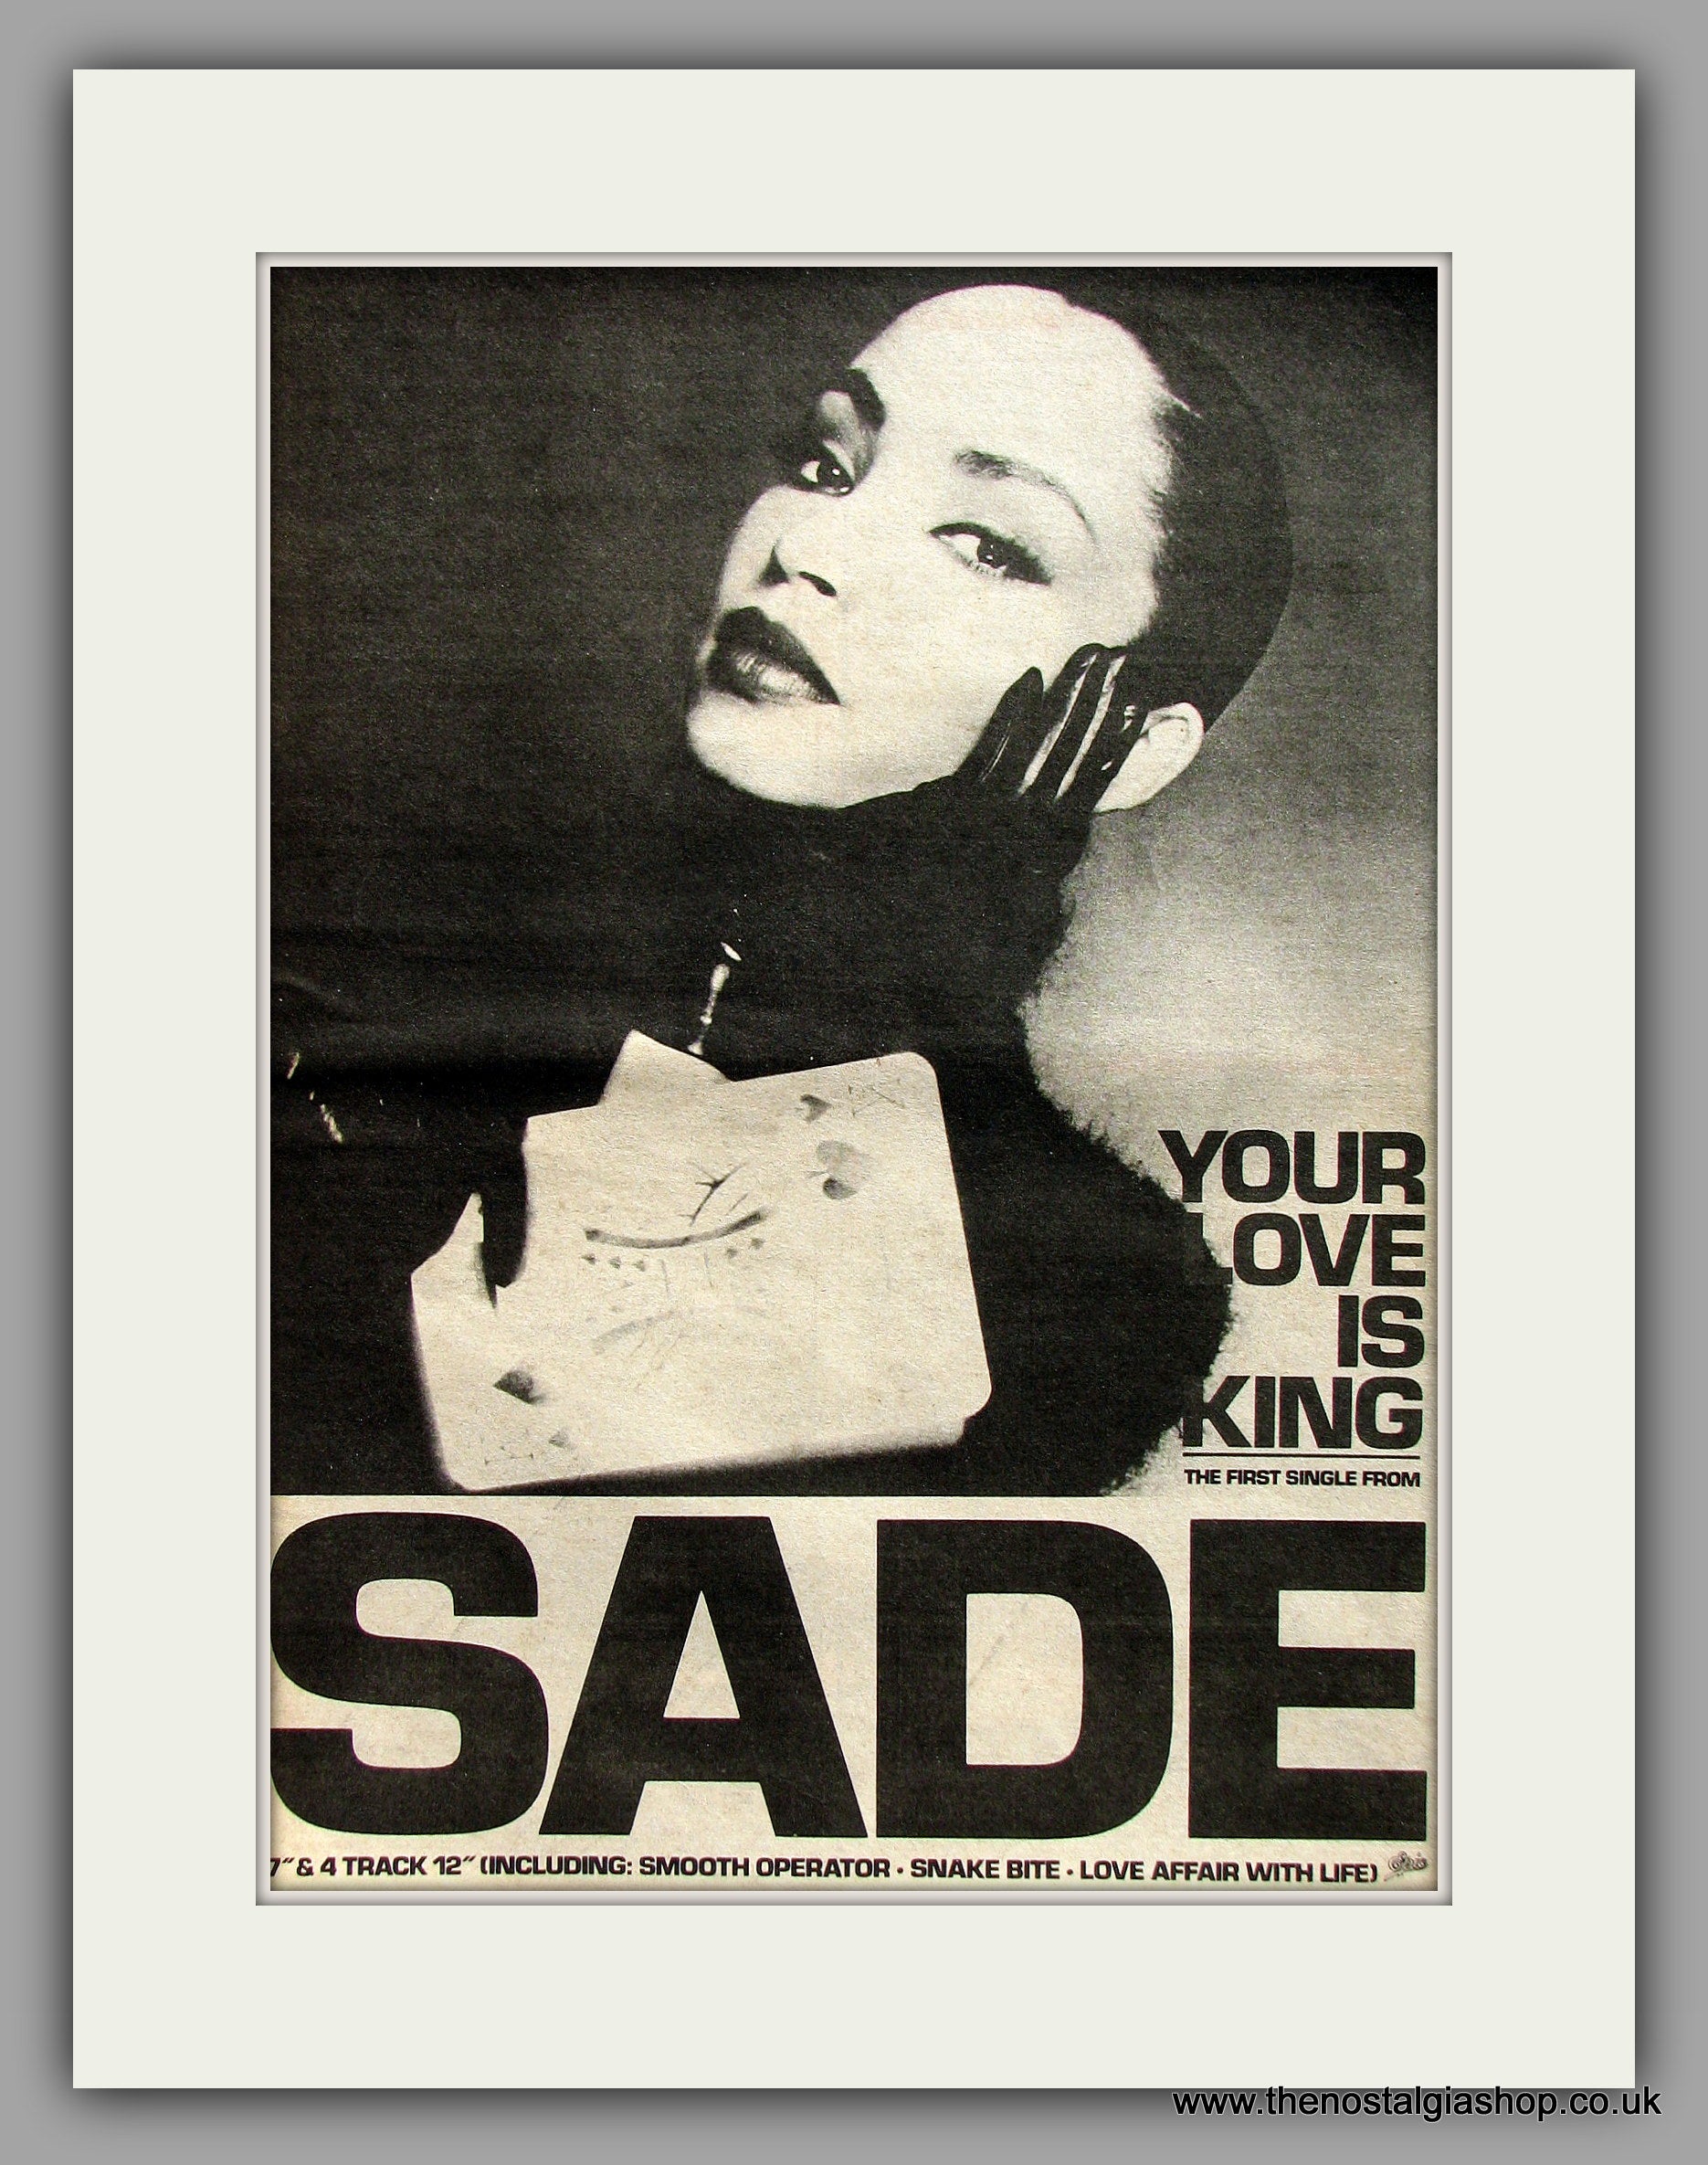 Sade - Your Love Is King / By Your Love